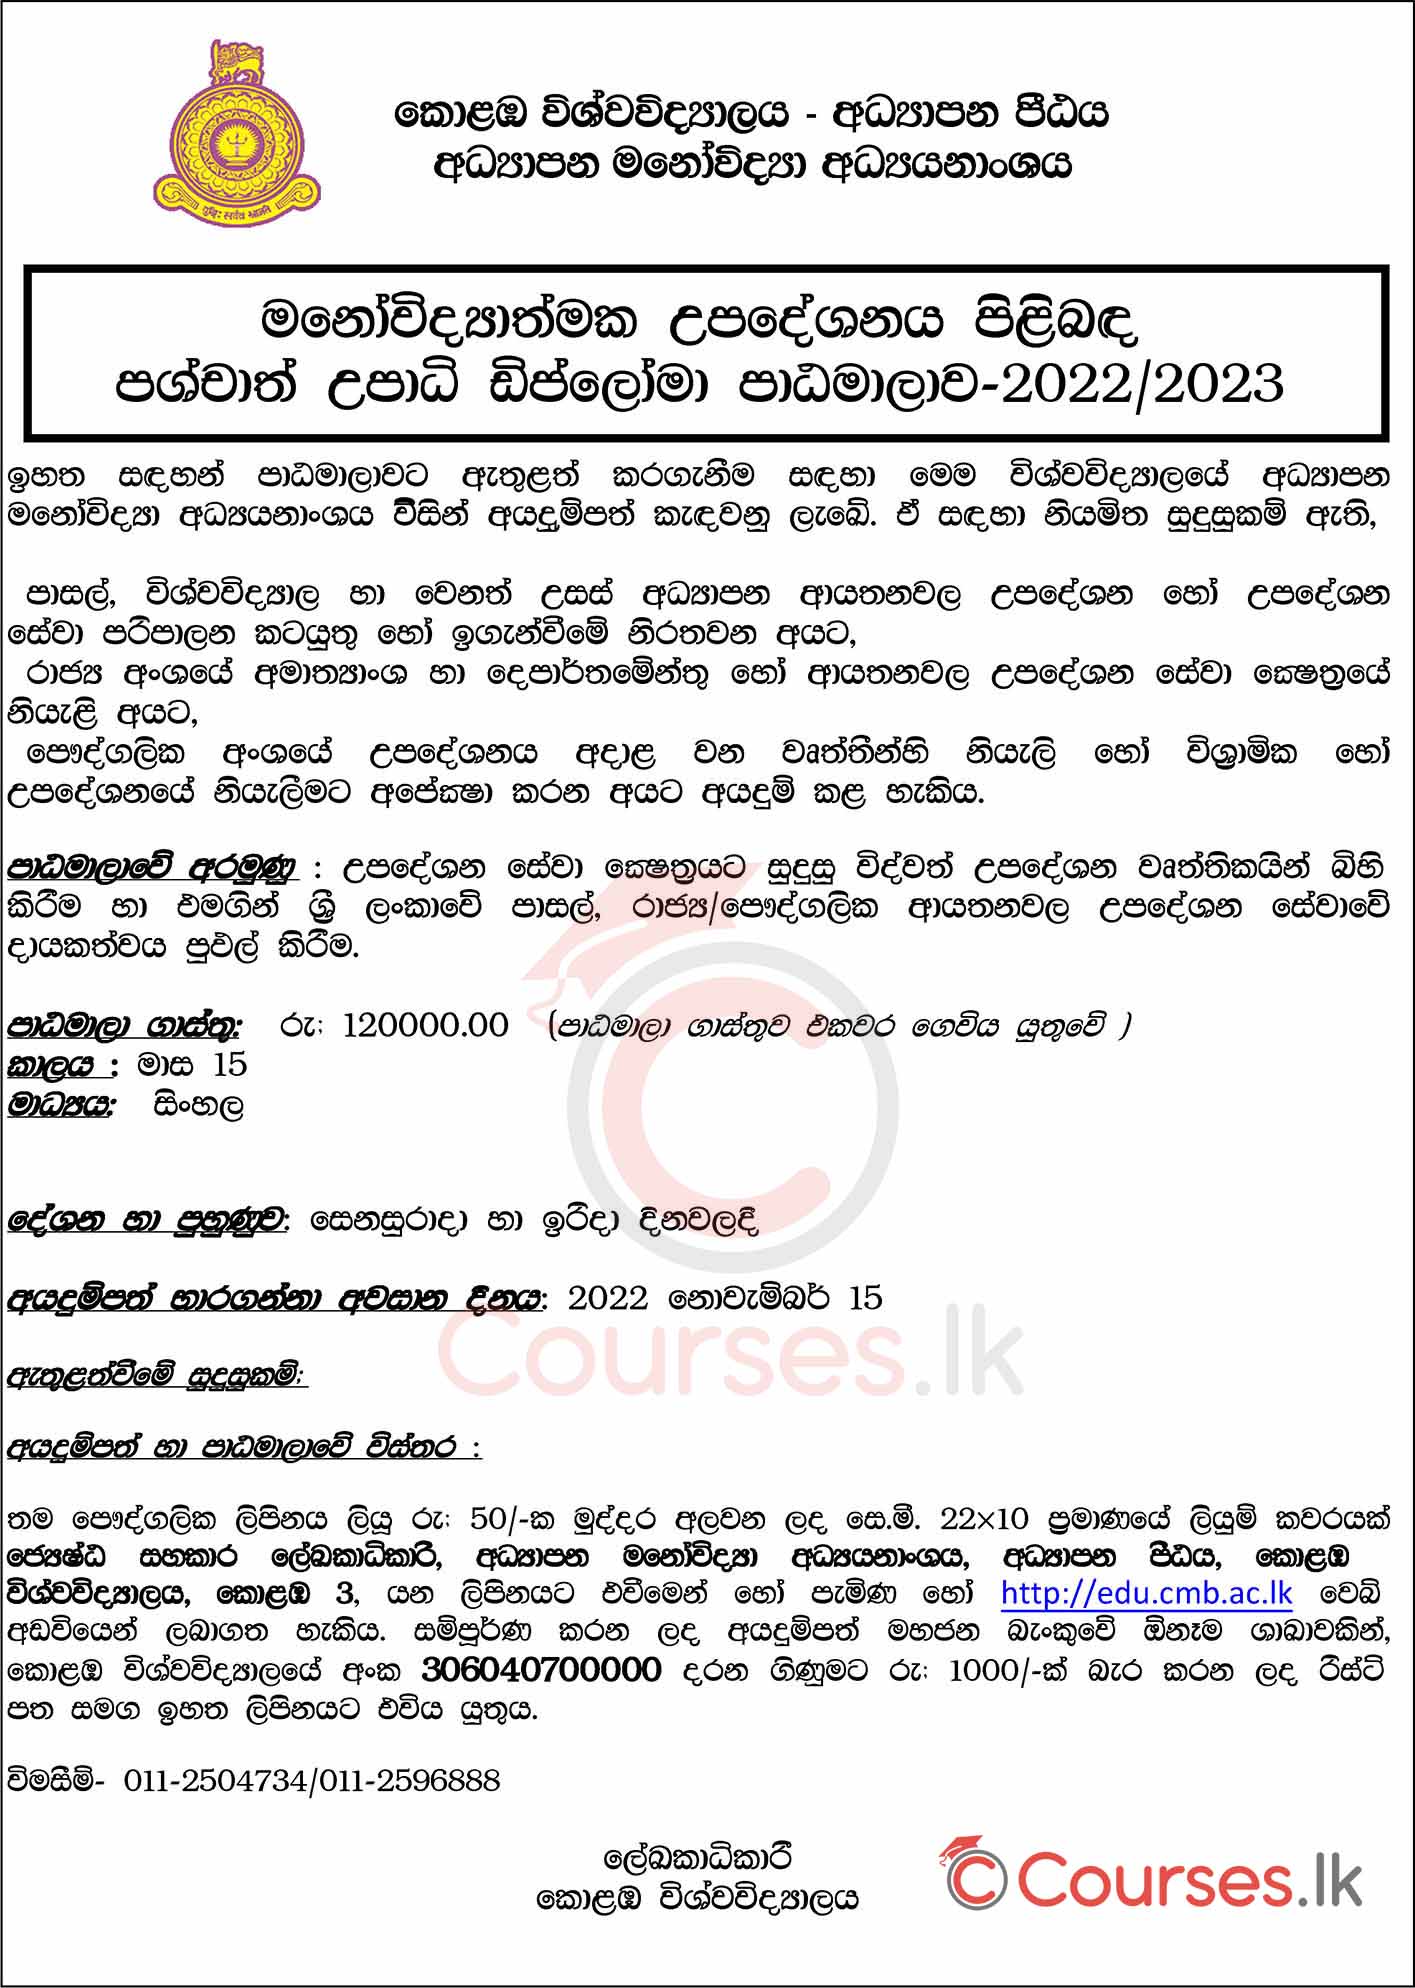 Postgraduate Diploma in Counseling 2022/23 - University of Colombo